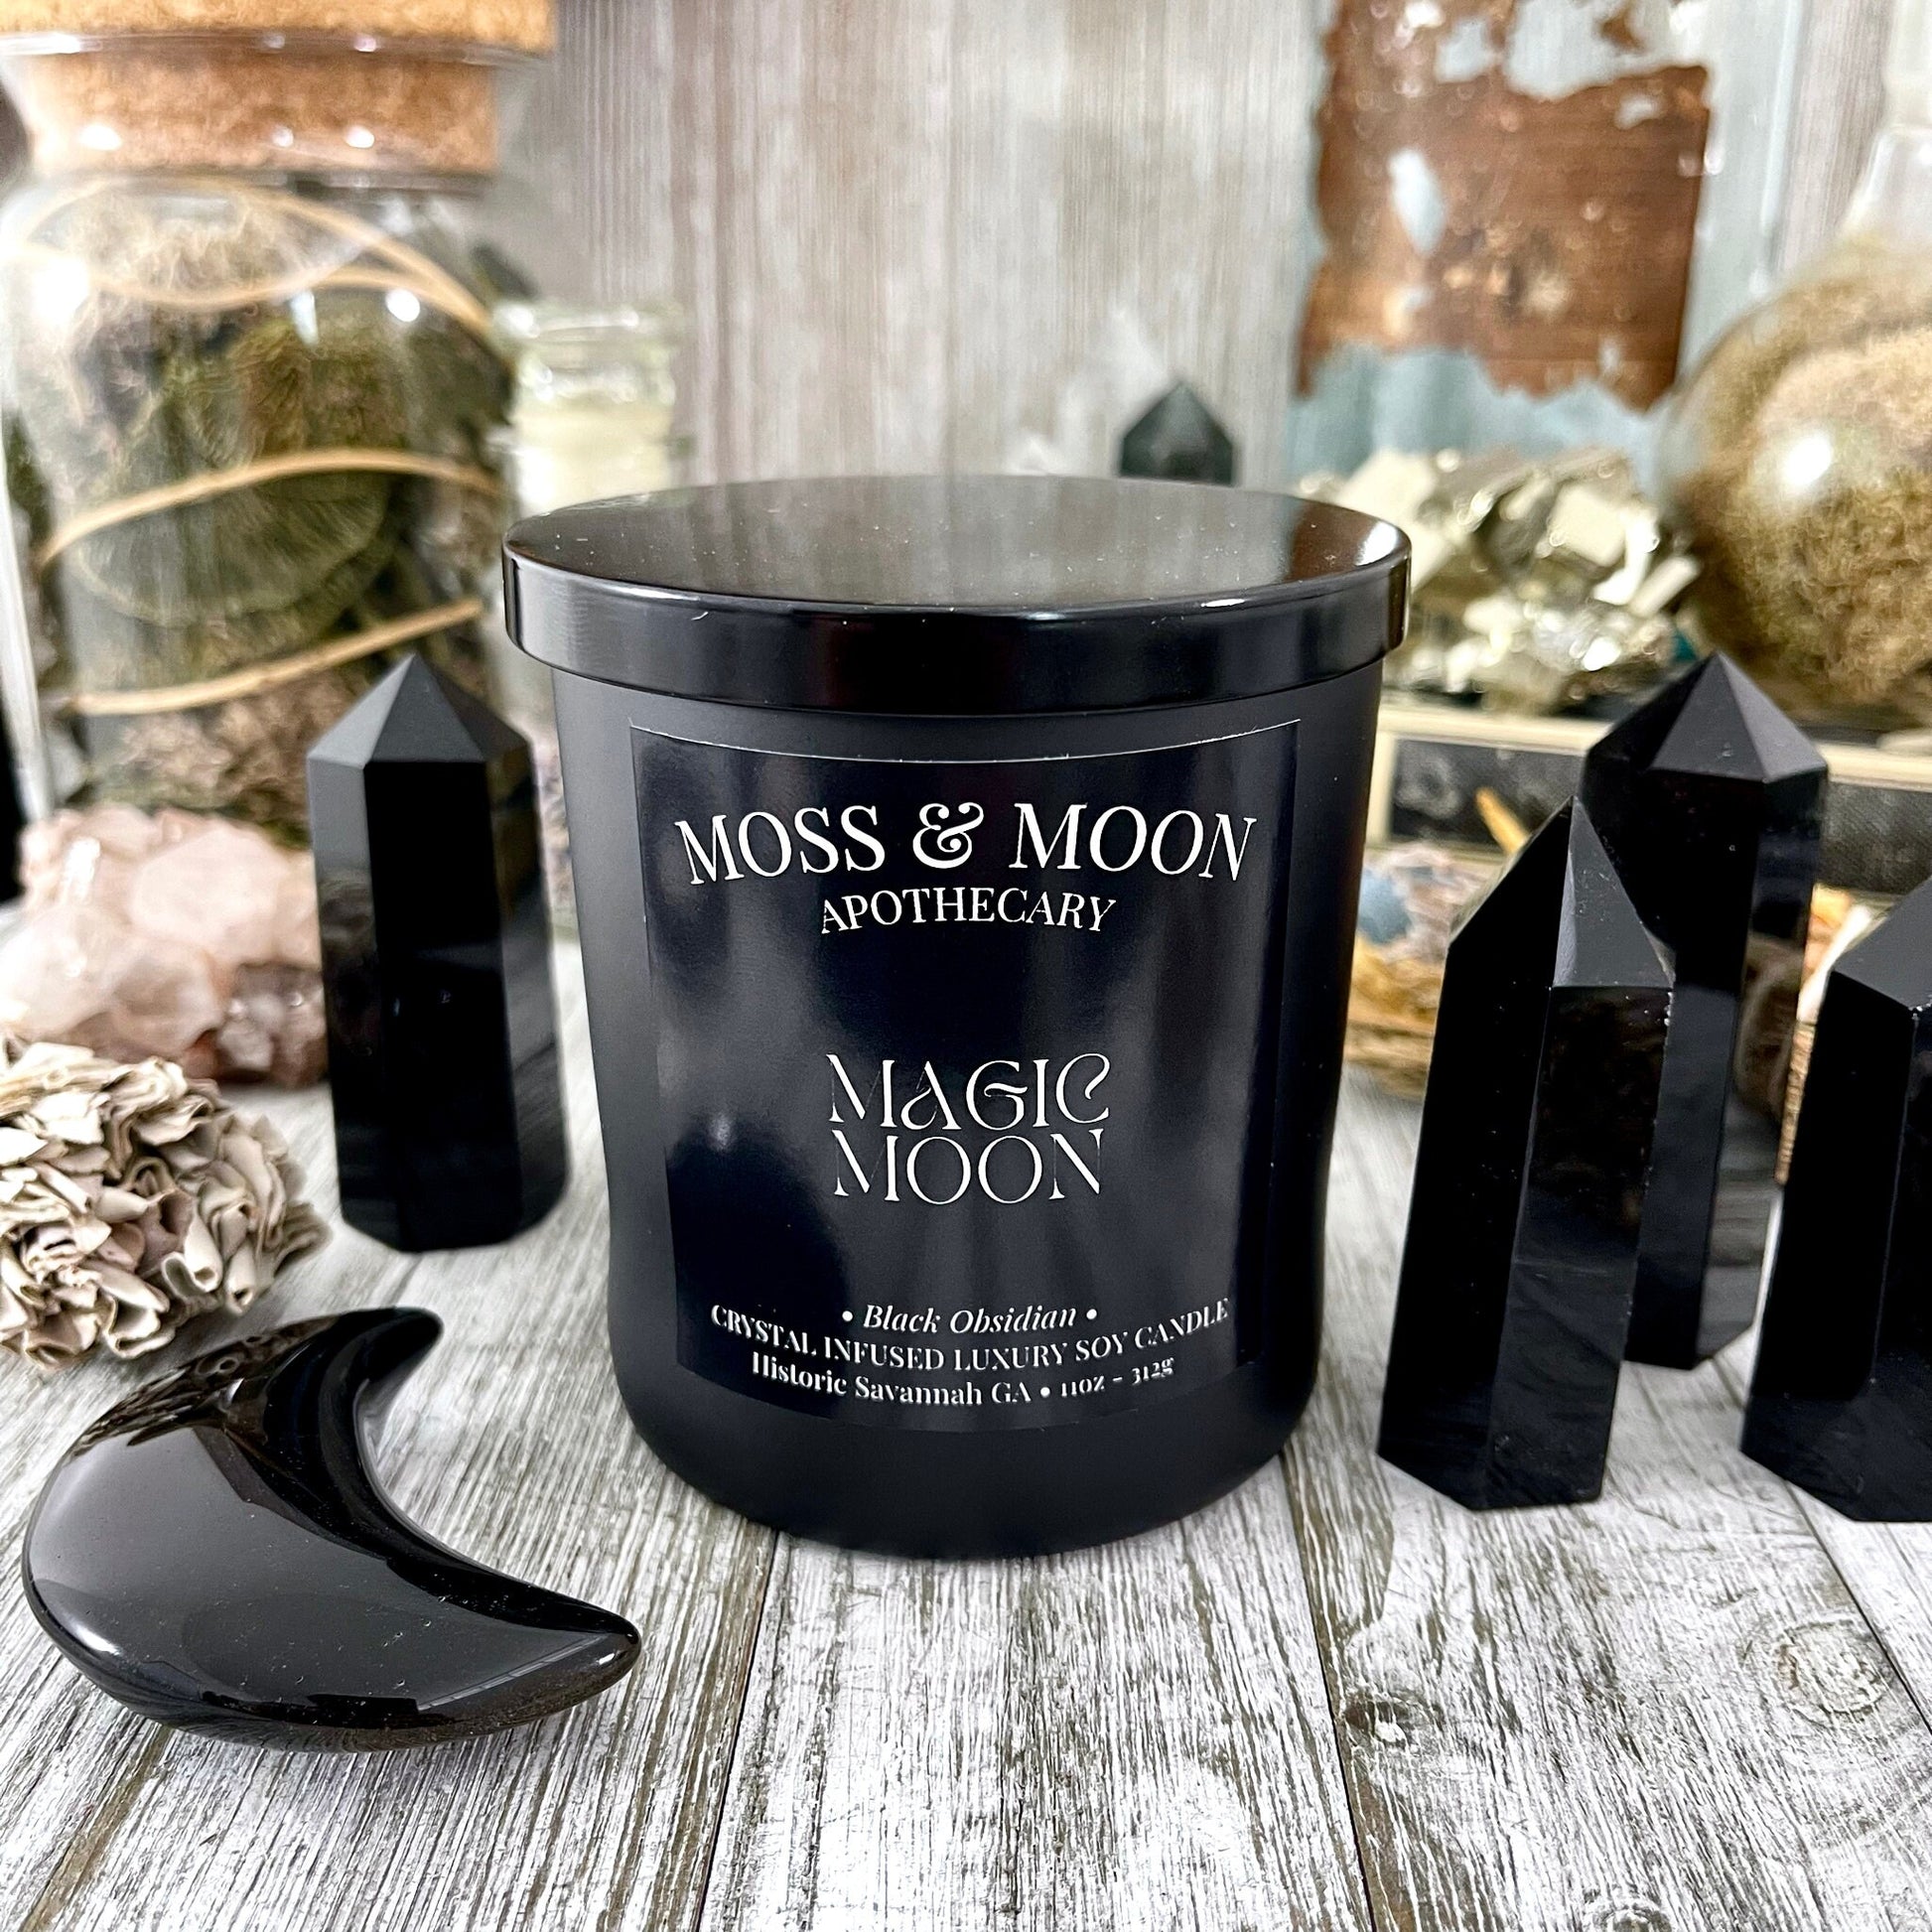 aromatherapy candle, Black Obsidian, Candles, Candles & Holders, Container Candles, crystal candle, Crystal Candles, crystal healing, eco-friendly candle, Etsy ID: 1480225113, handmade candle, Home & Living, Home Decor, luxury candle, Magic Moon Candle, m